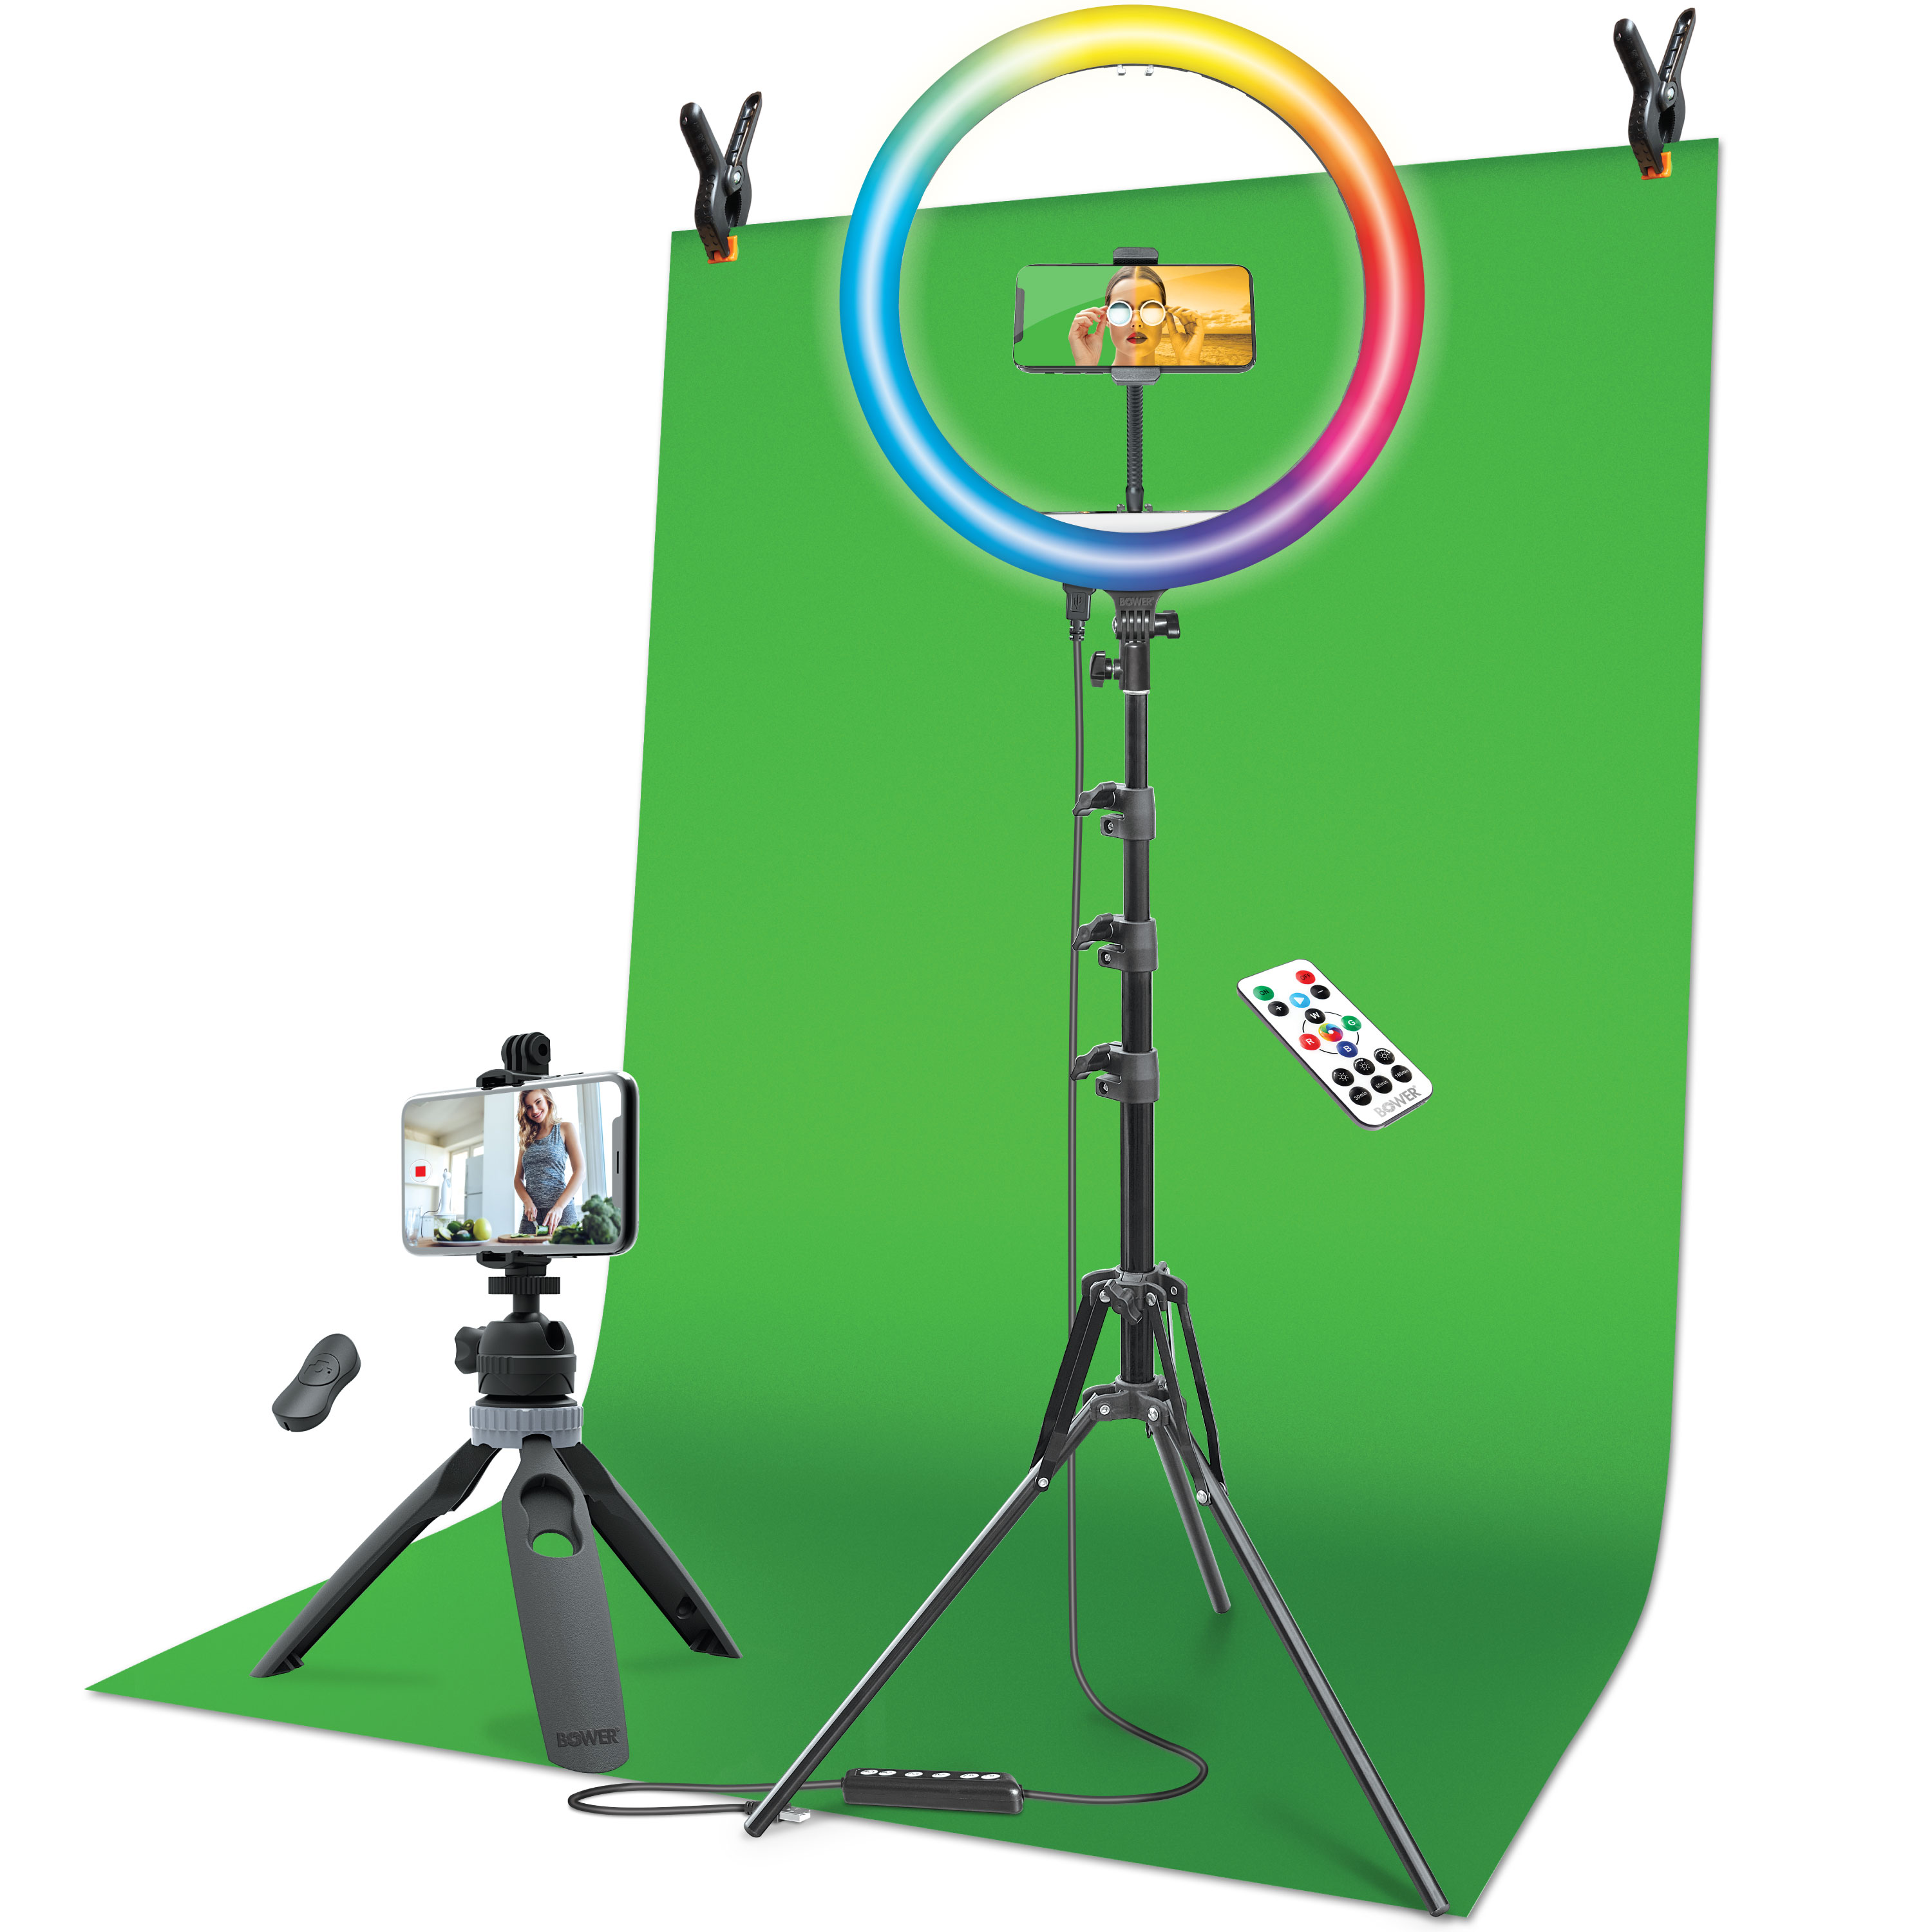 Bower Content Creator Kit with16-inch RGB Ring Light, 62-inch Adjustable Tripod, and Green Screen for Content Creation Camera Accessory - image 1 of 7